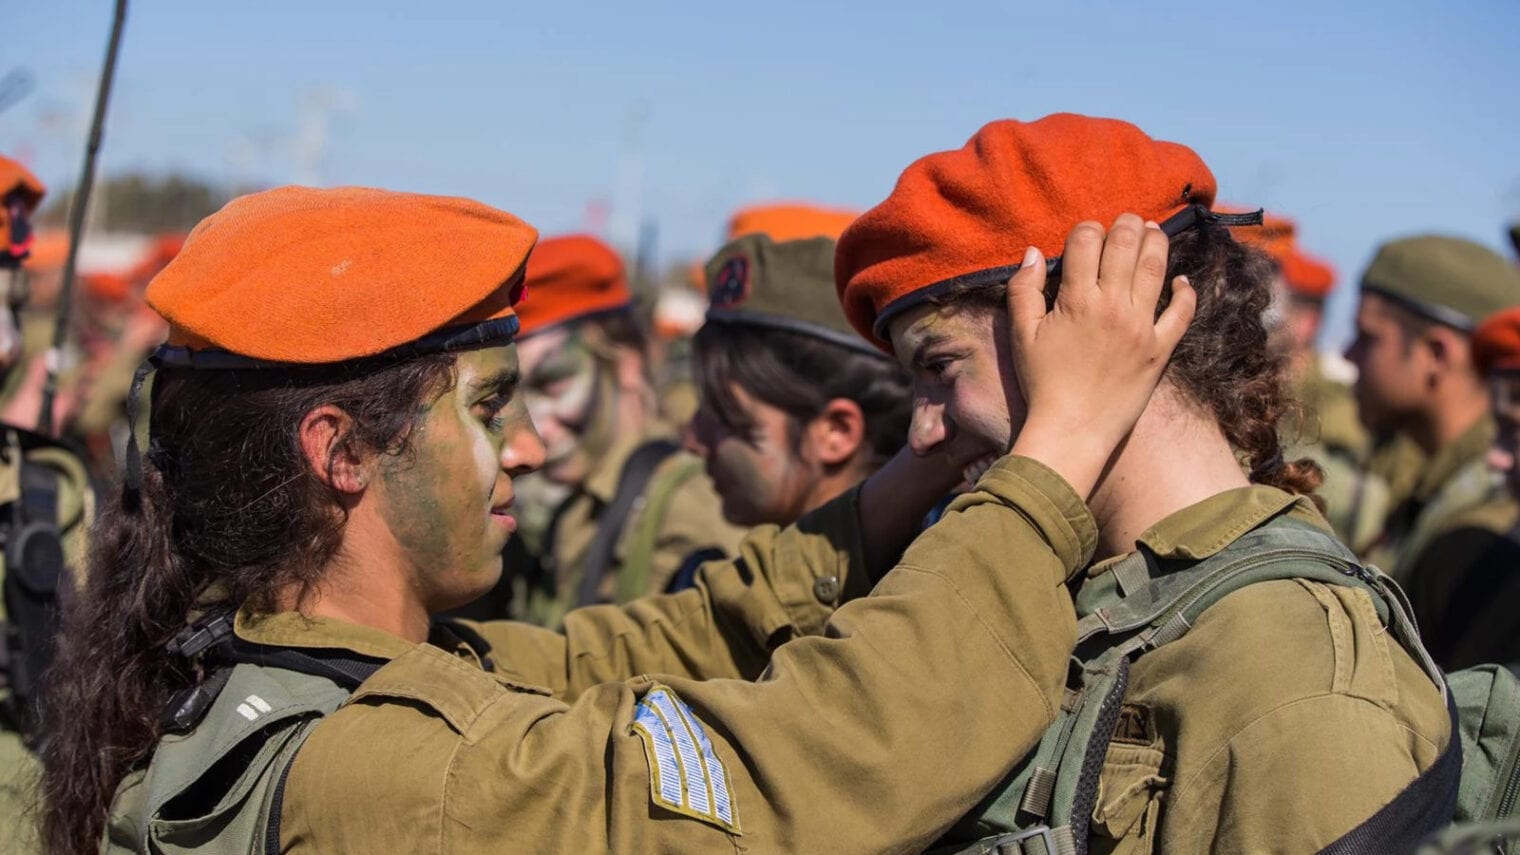 Female soldiers in the Home Front Command getting their berets. Photo courtesy of IDF